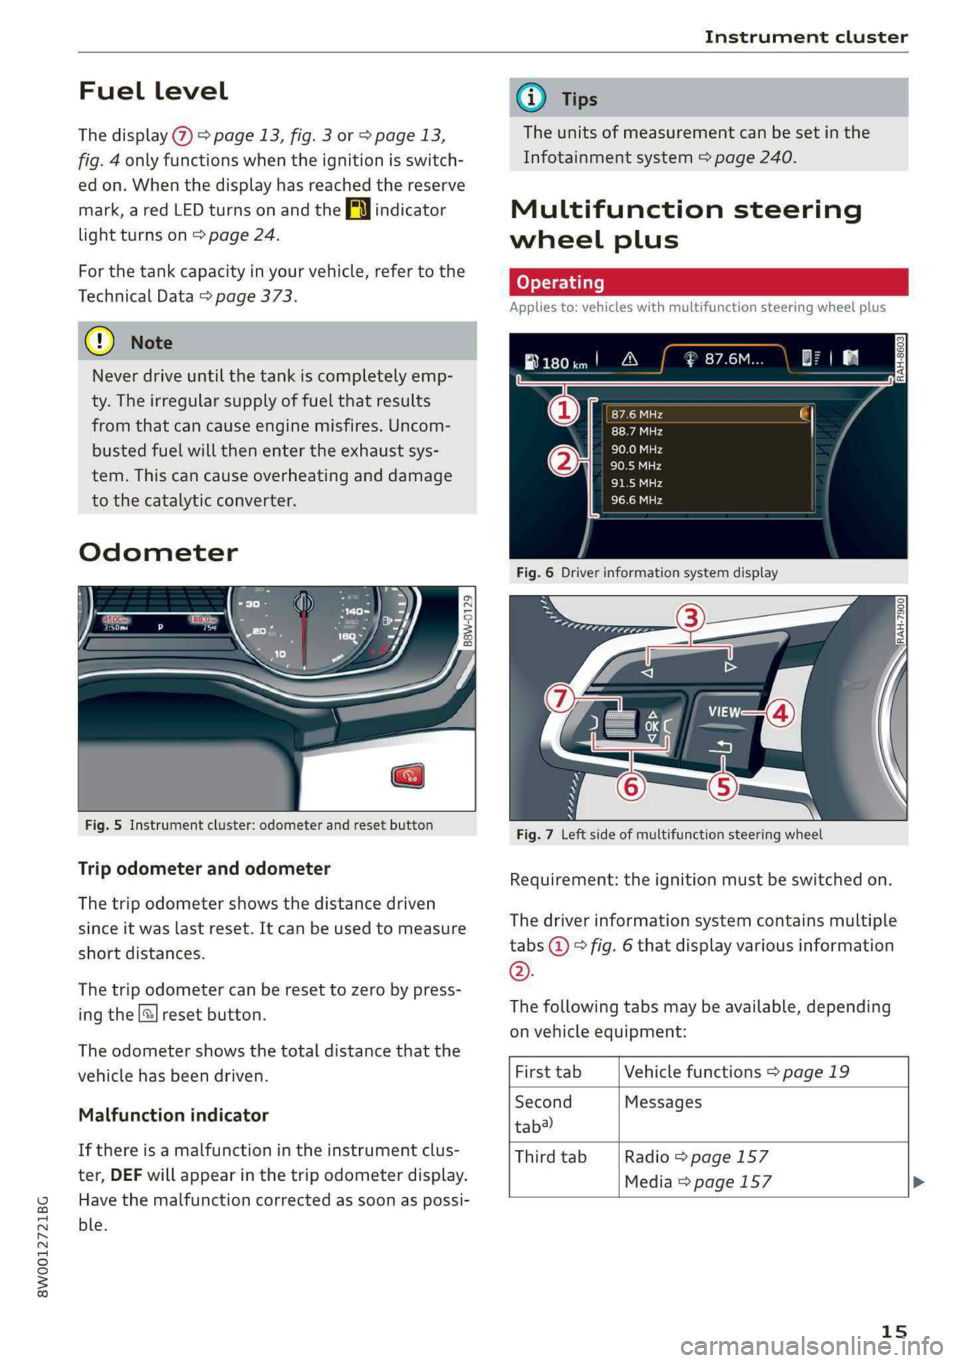 AUDI A4 2019  Owners Manual 8W0012721BG
Instrumentcluster
 
Fuellevel
Thedisplay>page13,fig.3orpage13,
fig.4onlyfunctionswhentheignitionisswitch-
edon.Whenthedisplayhasreached thereserve
mark,aredLEDturnsonandtheAlindicator
ligh